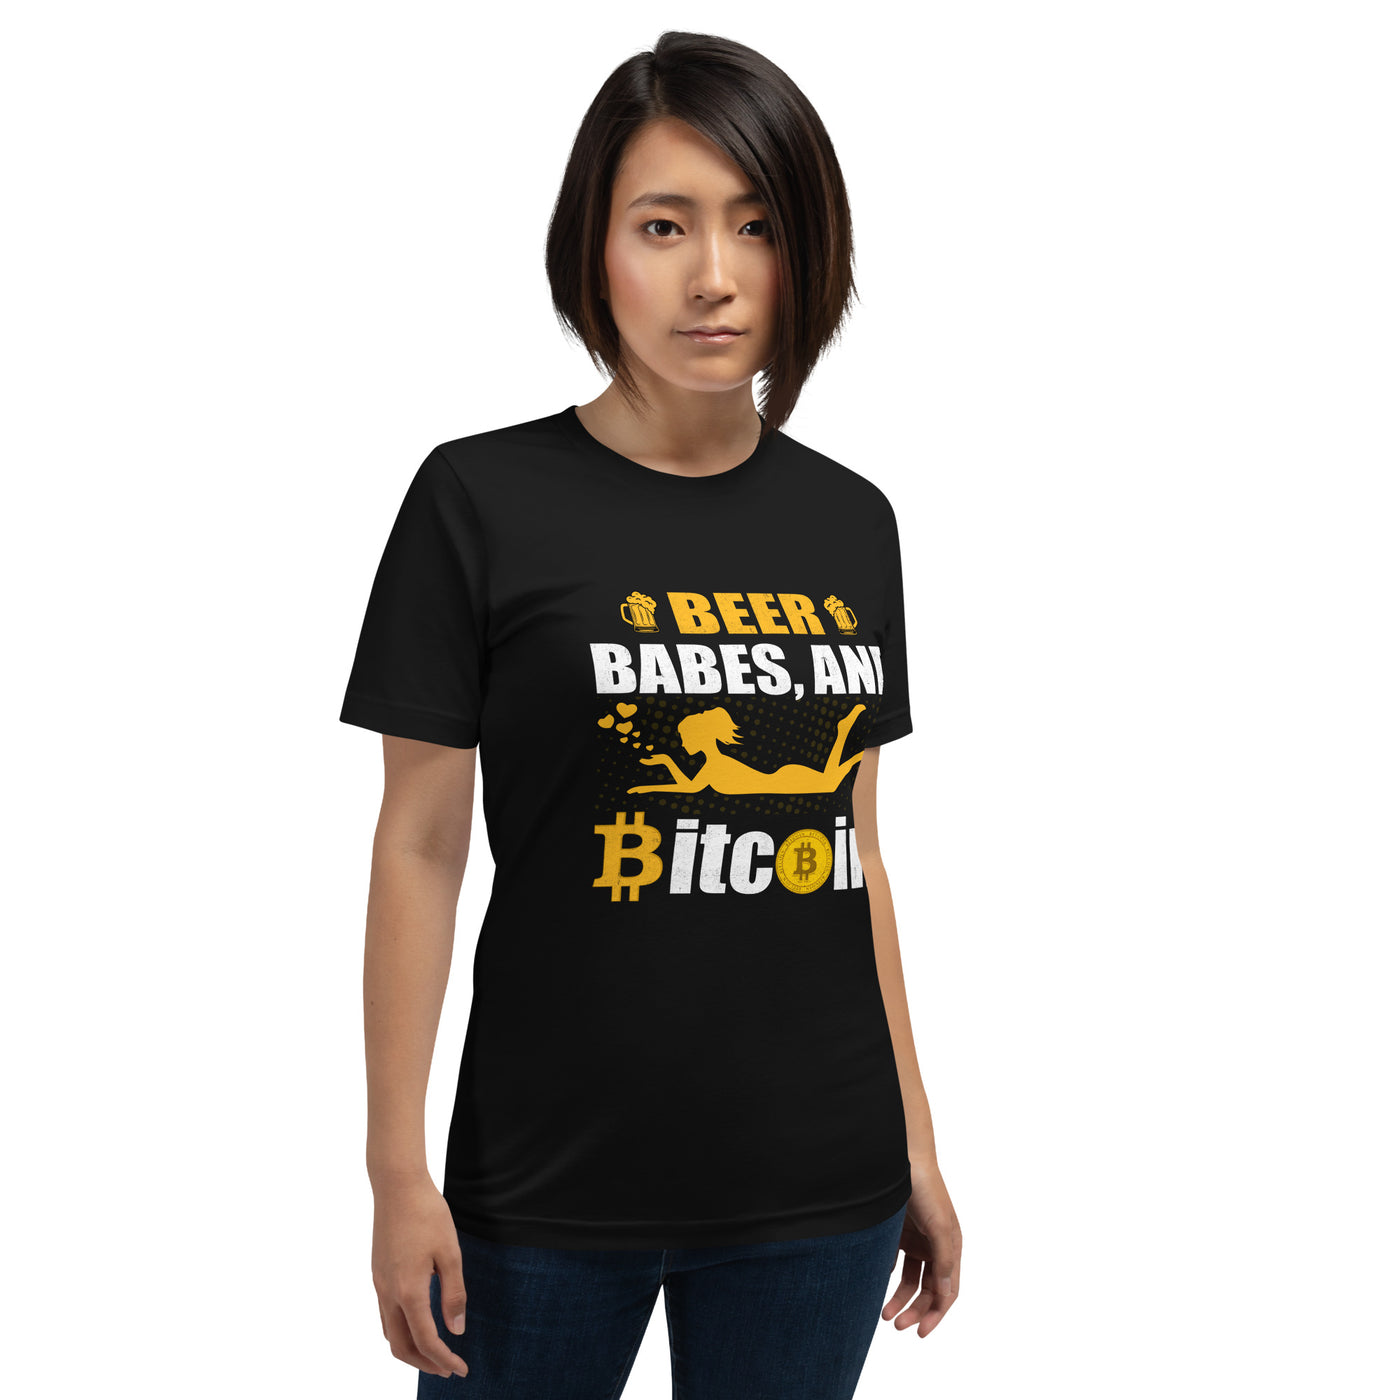 Beer Babe and Bitcoin Unisex t-shirt